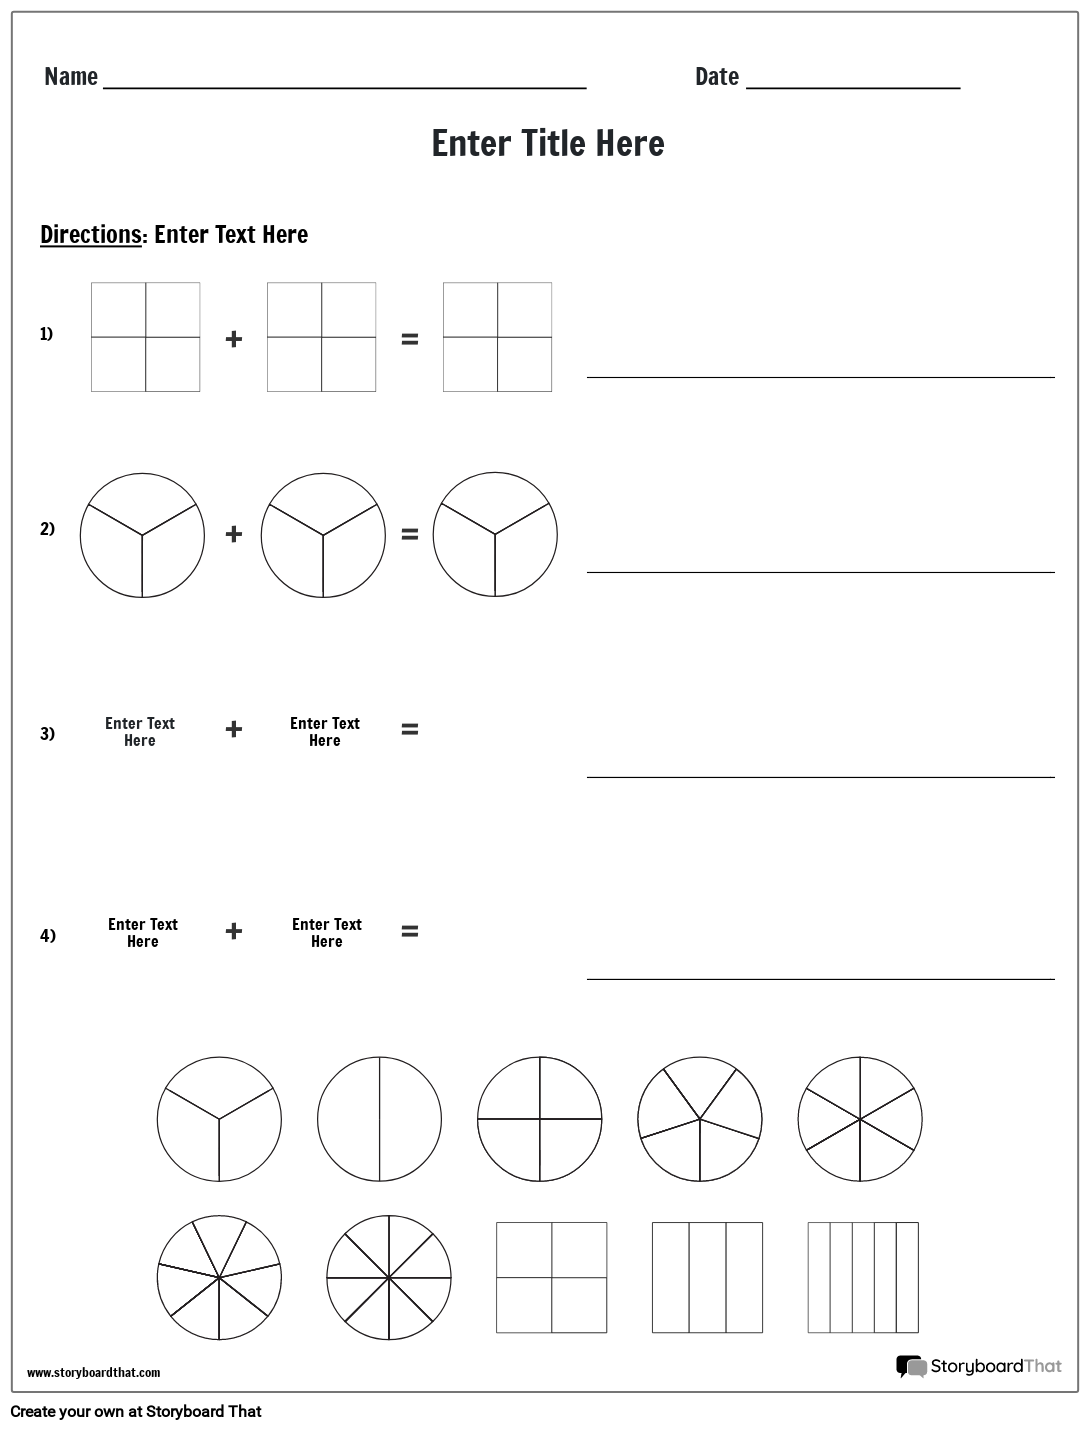 Adding Fractions Template Storyboard By Worksheet templates